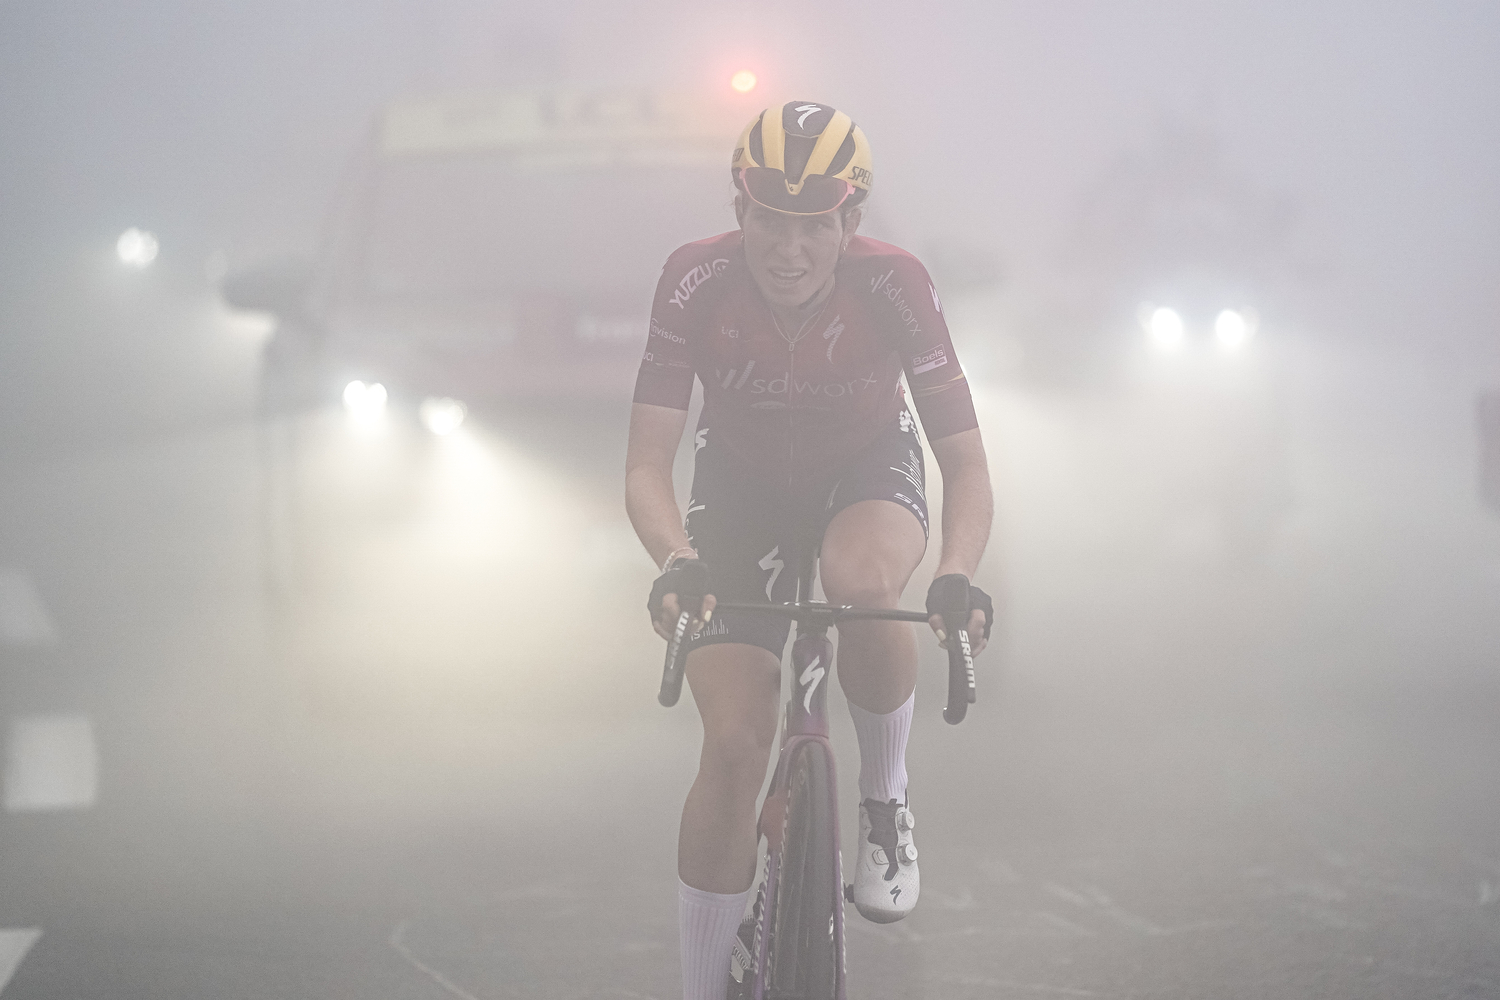 Tour de France Femmes Stage 7: Vollering Takes Her Climbing Crown on Tourmalet